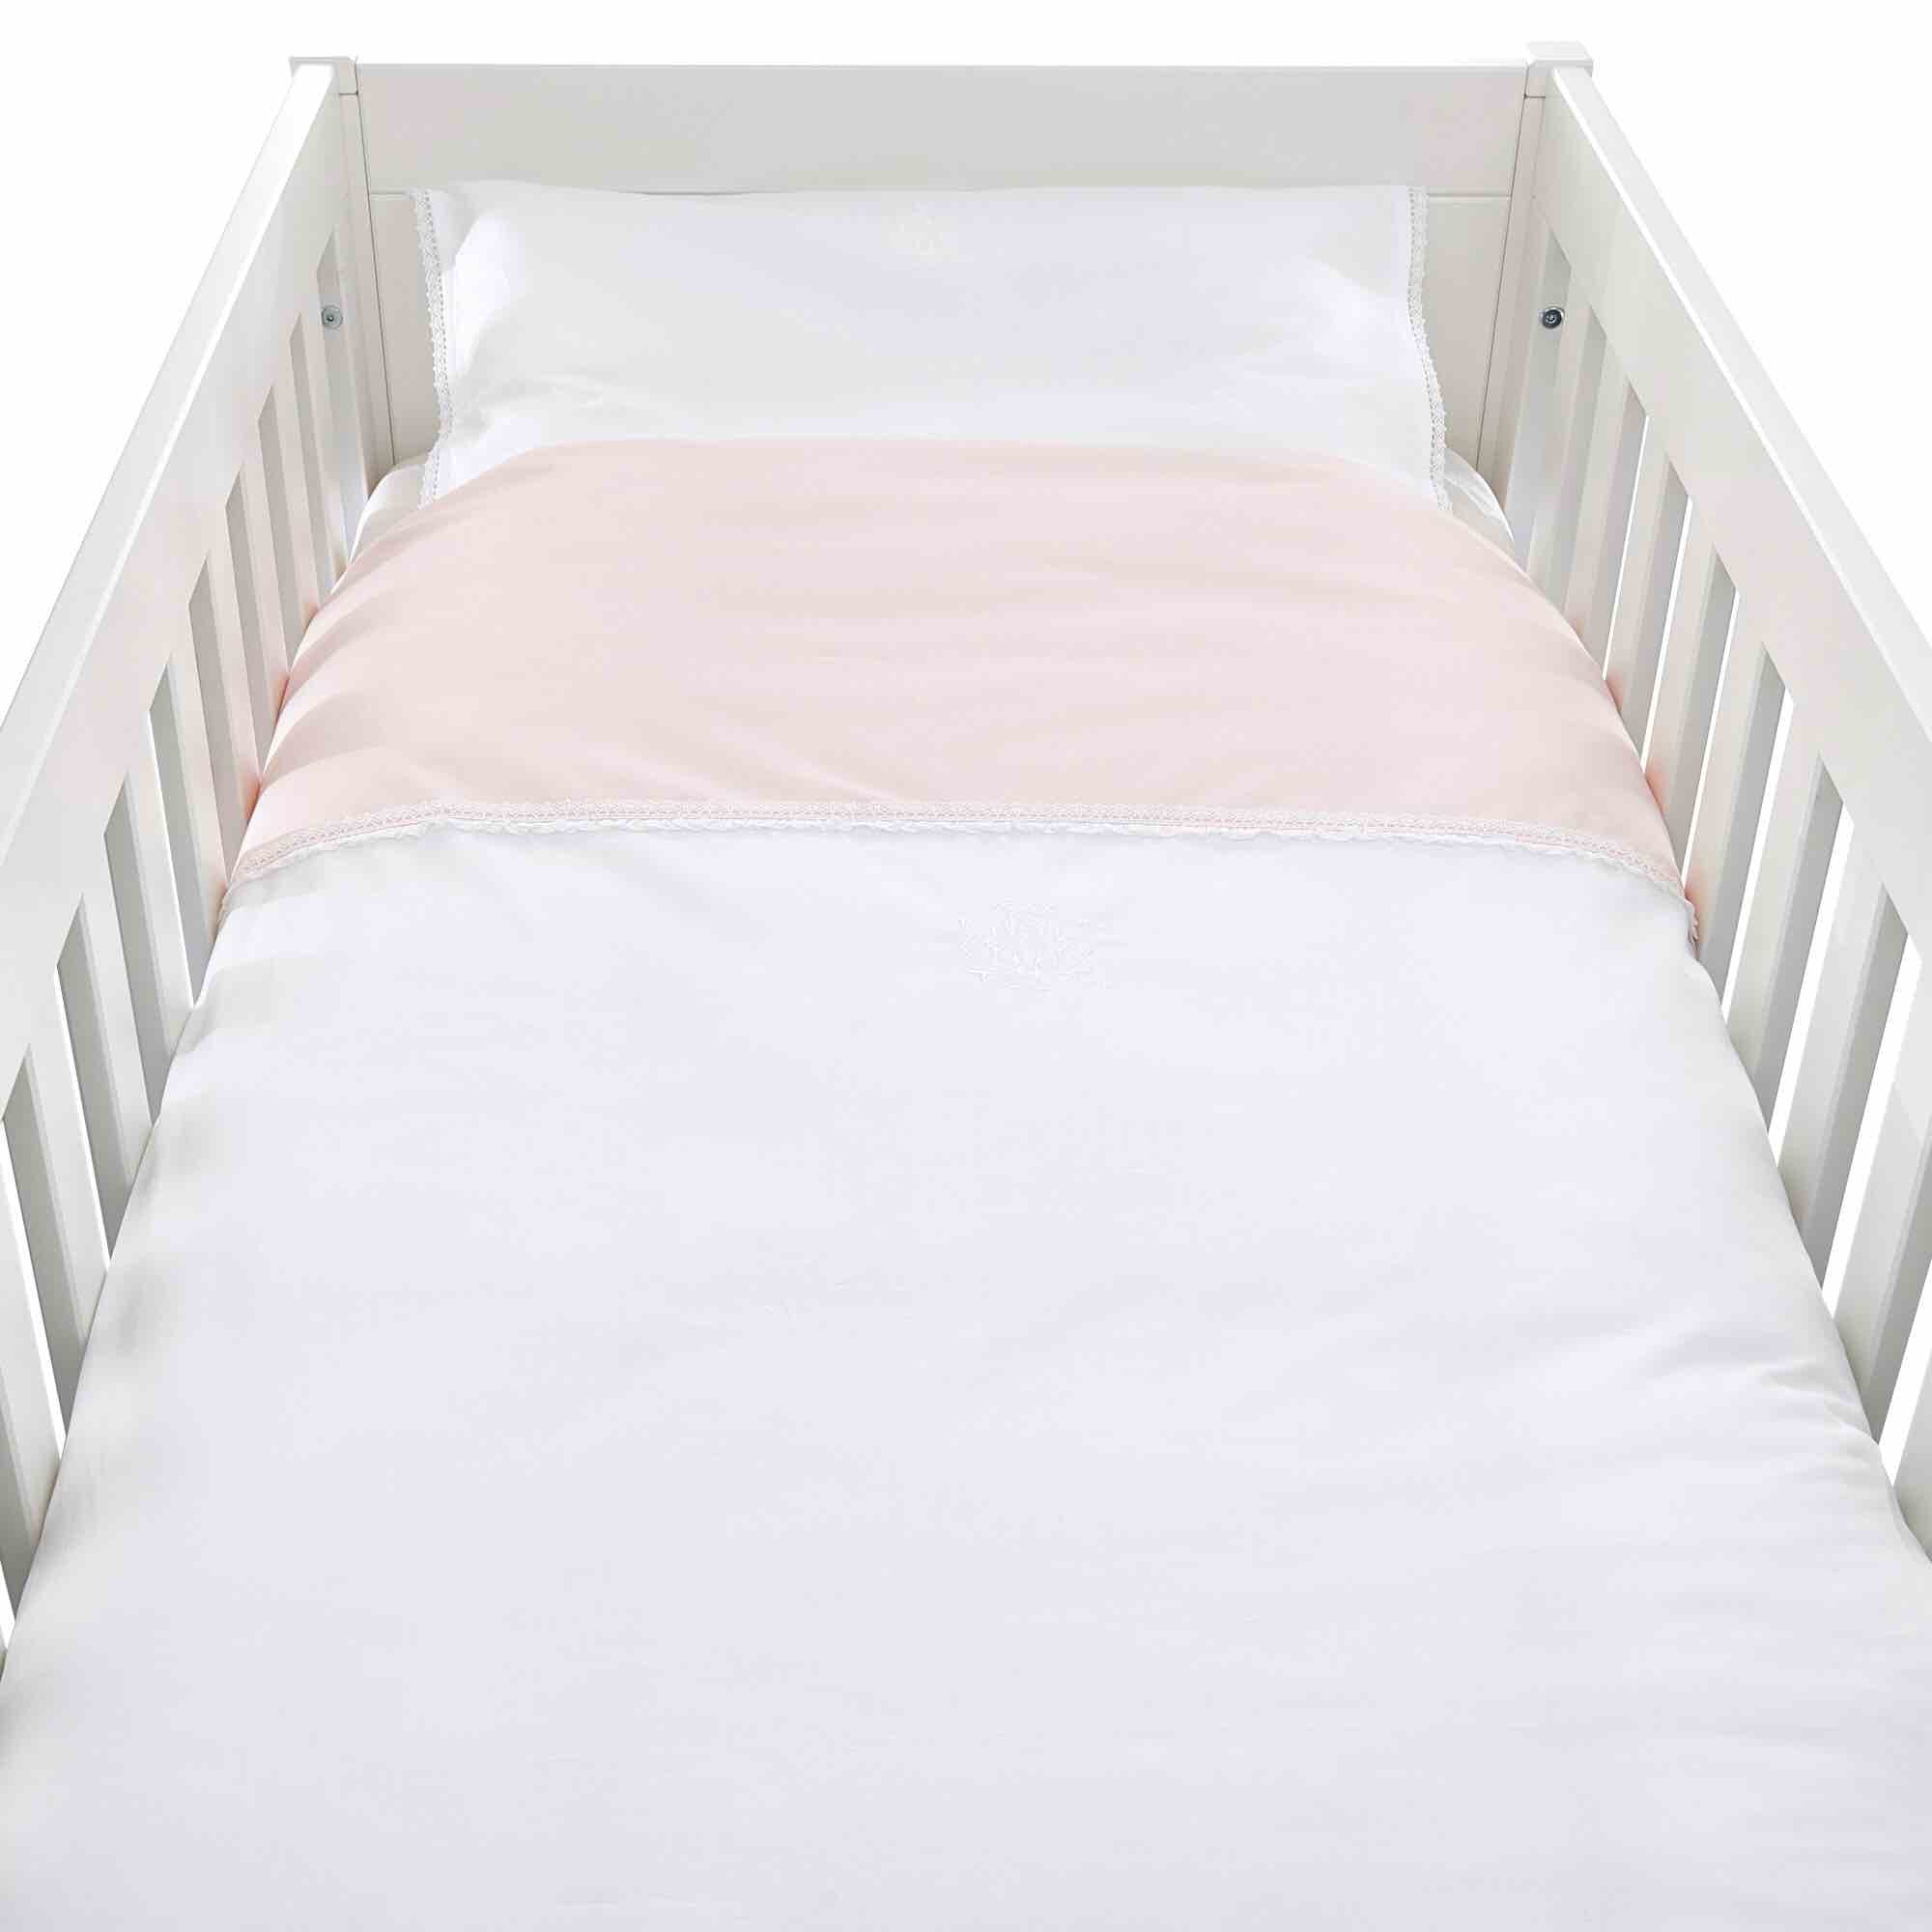 Theophile & Patachou Cot Bed Duvet Cover - Royal Pink